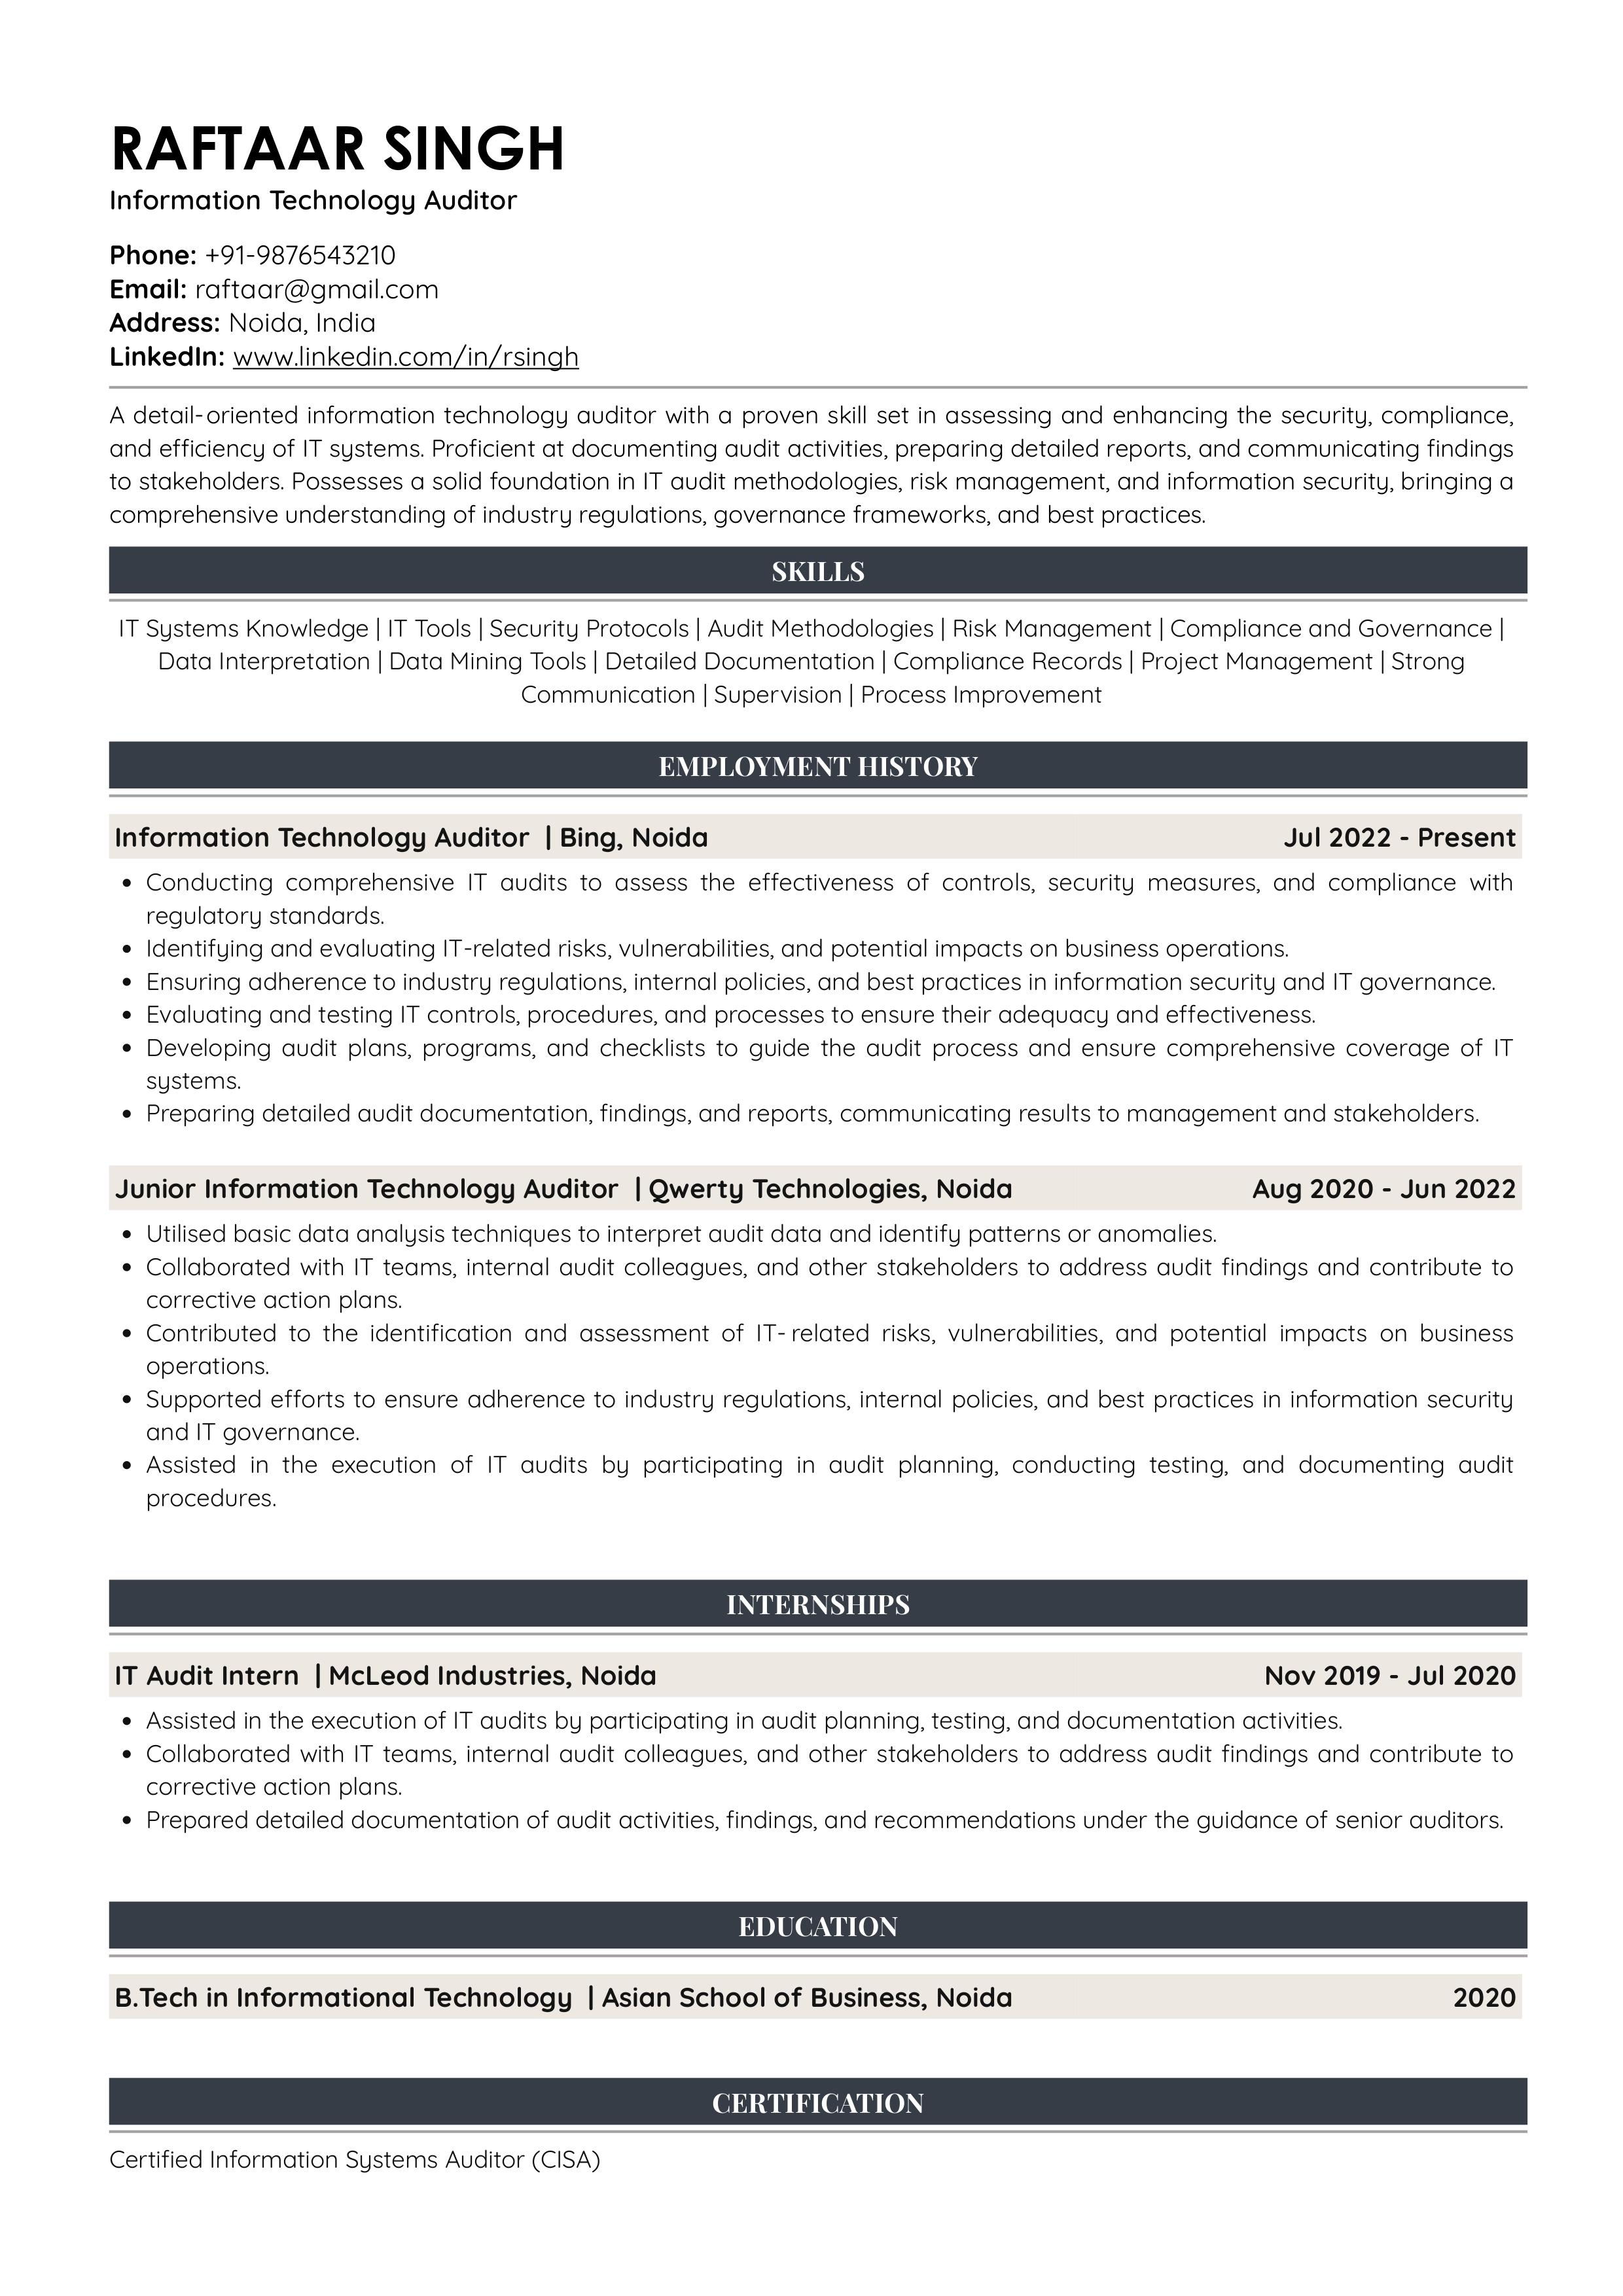 Sample Resume of Information Technology Auditor | Free Resume Templates & Samples on Resumod.co